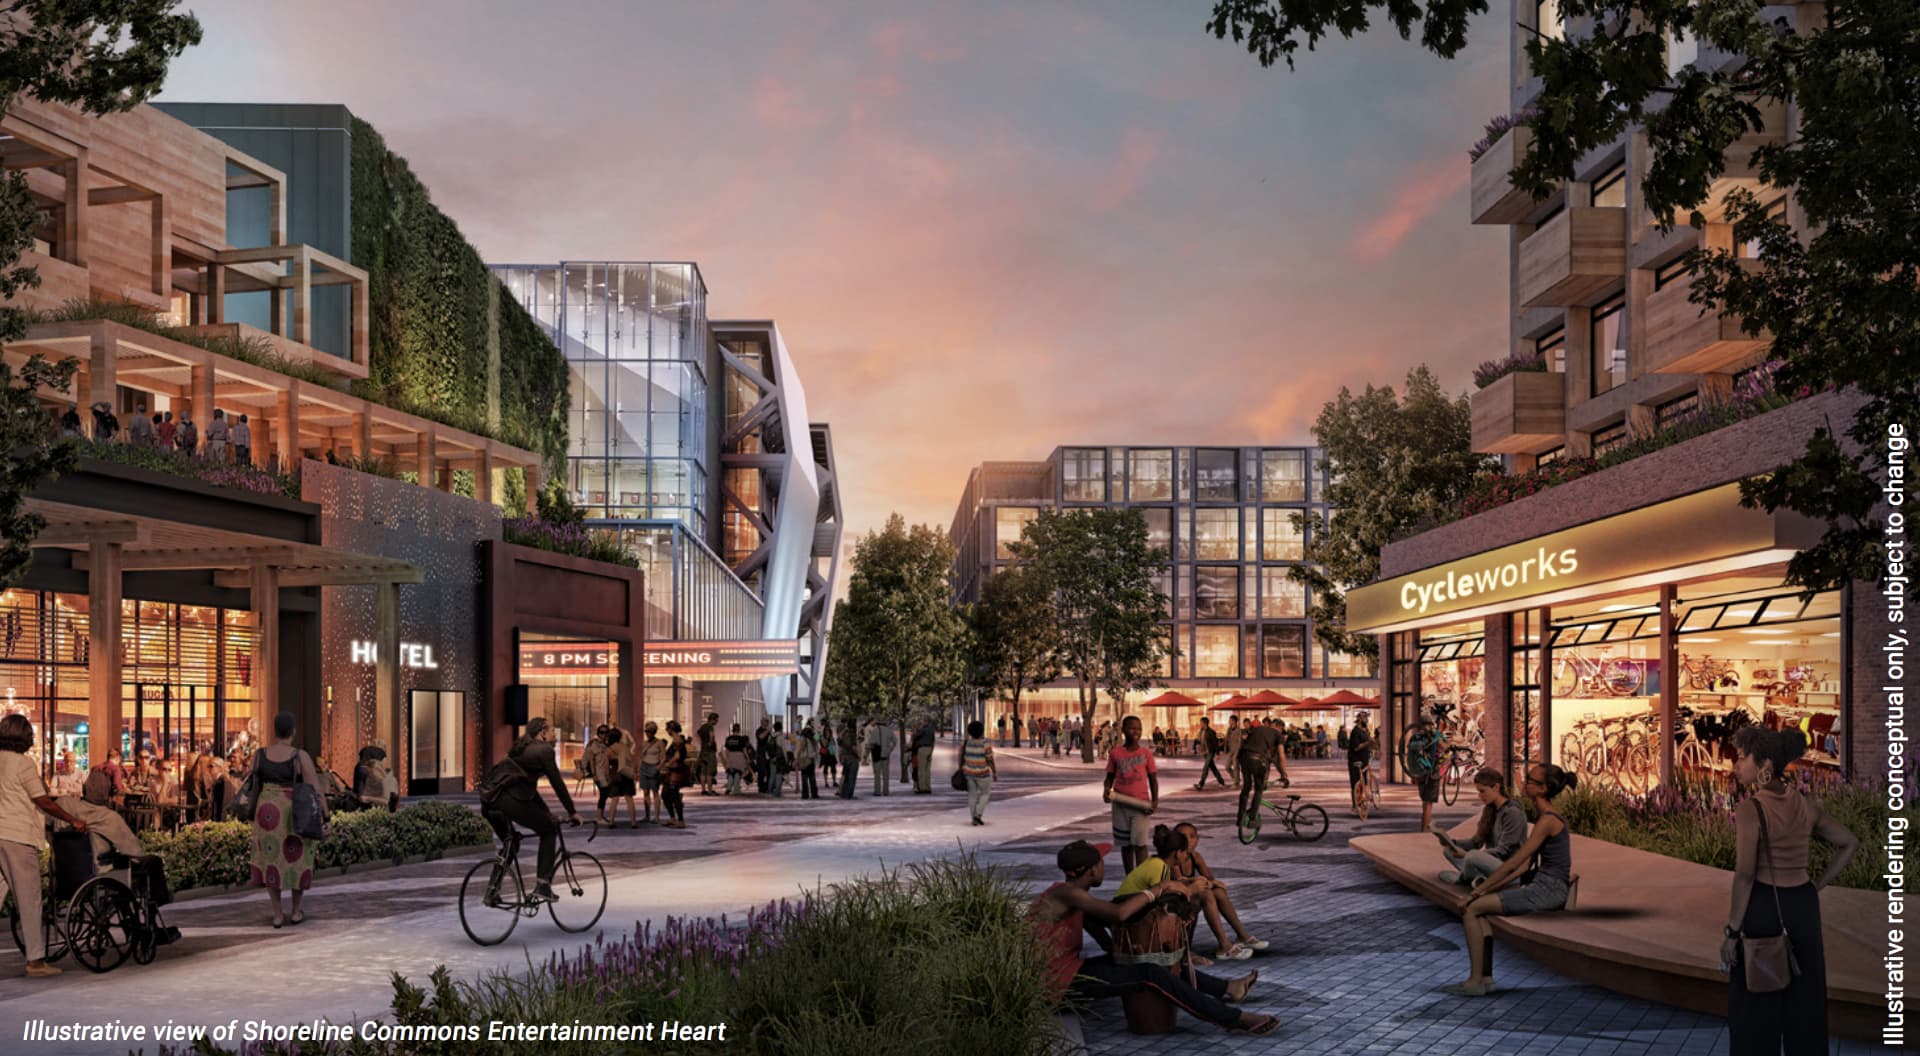 Google has huge plans for its home city — here’s a look at the massive development